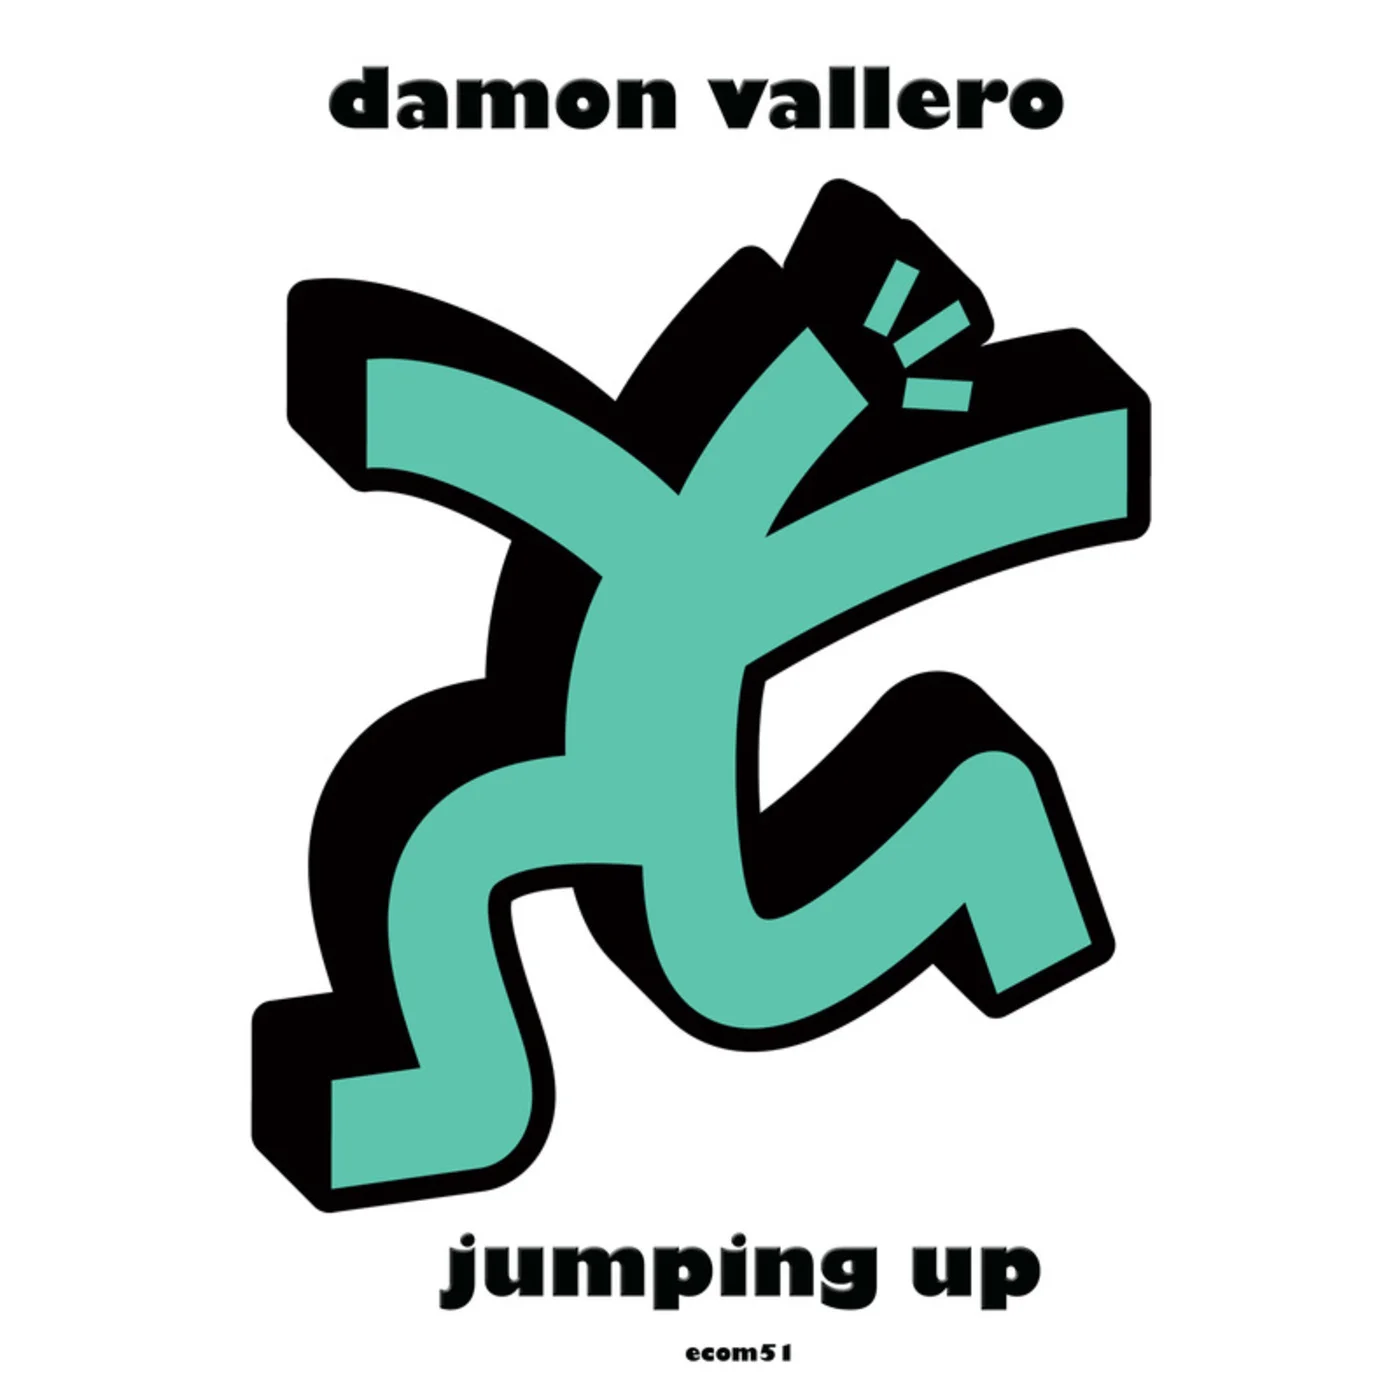 Damon Vallero delivers a powerhouse EP with "Jumping Up"